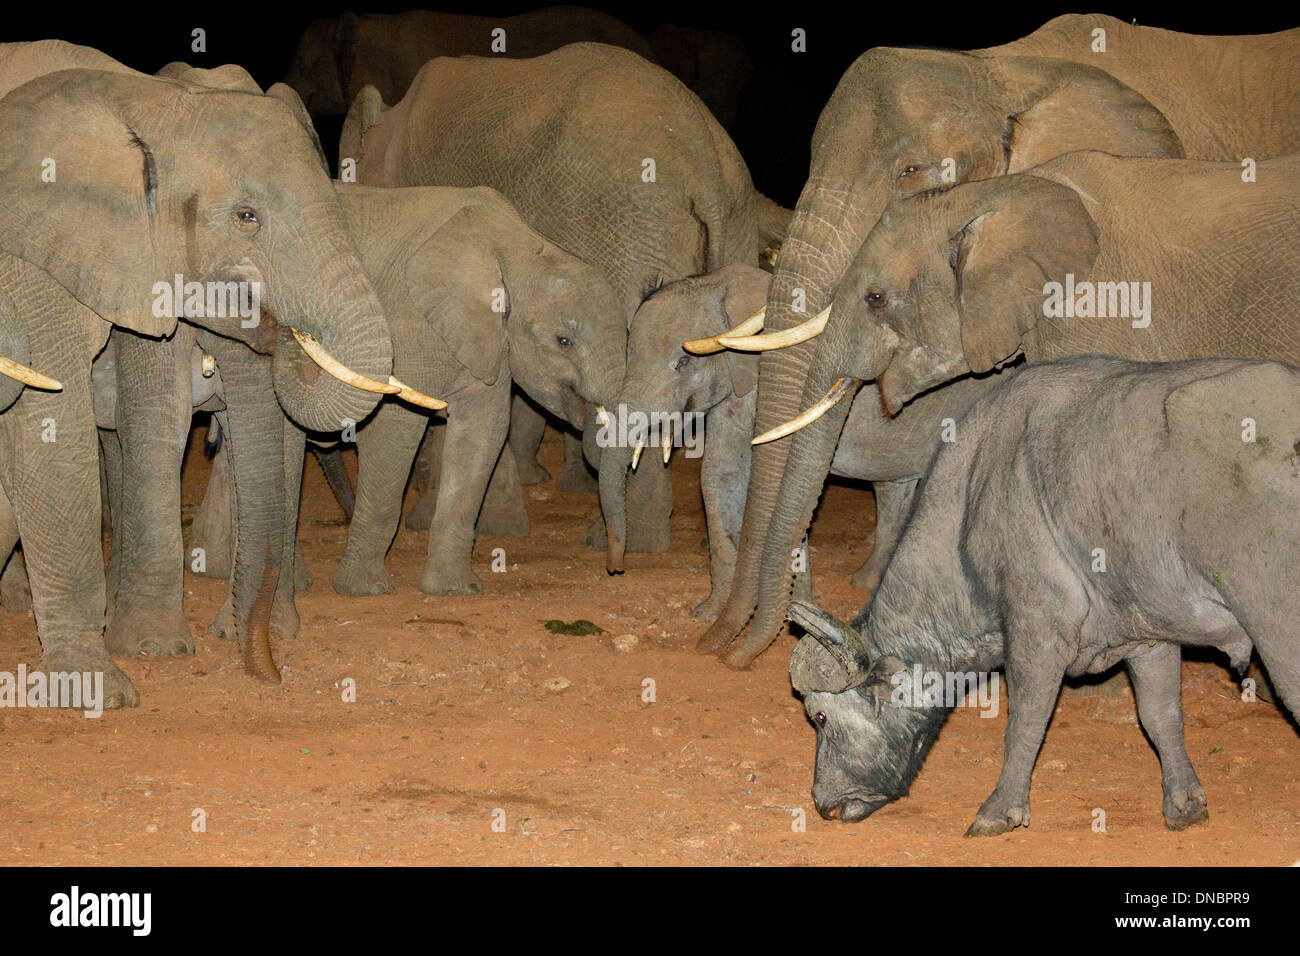 Elephants and buffalo at salt lick at the Ark in the Aberdares National Park, Kenya Stock Photo